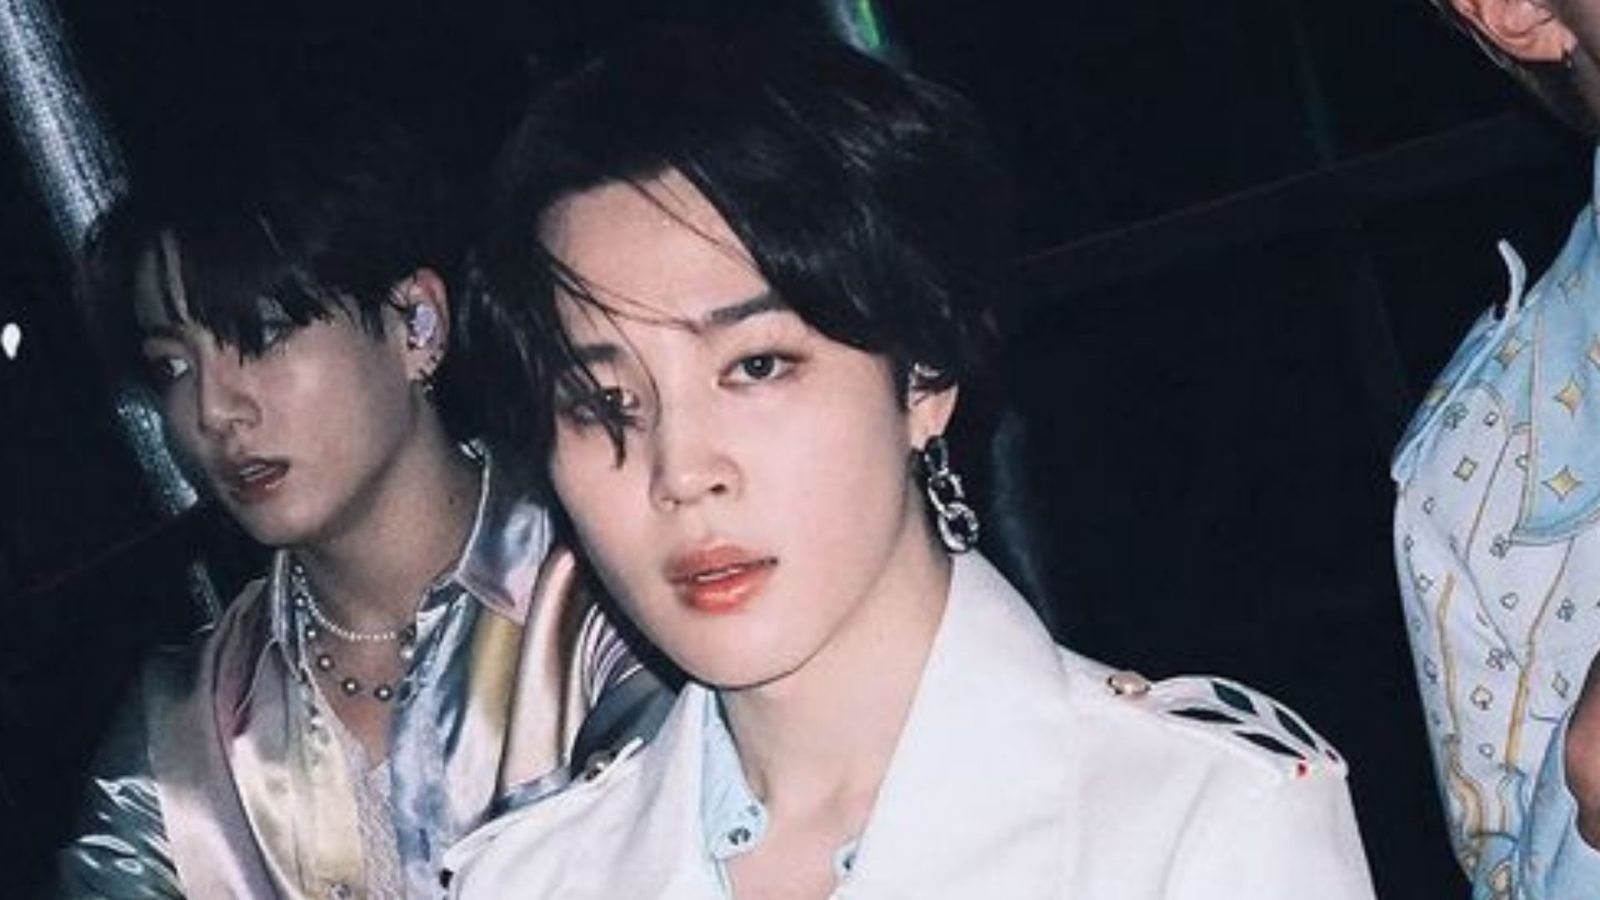 BTS’ Jimin to make K-drama OST debut with ‘Our Blues’